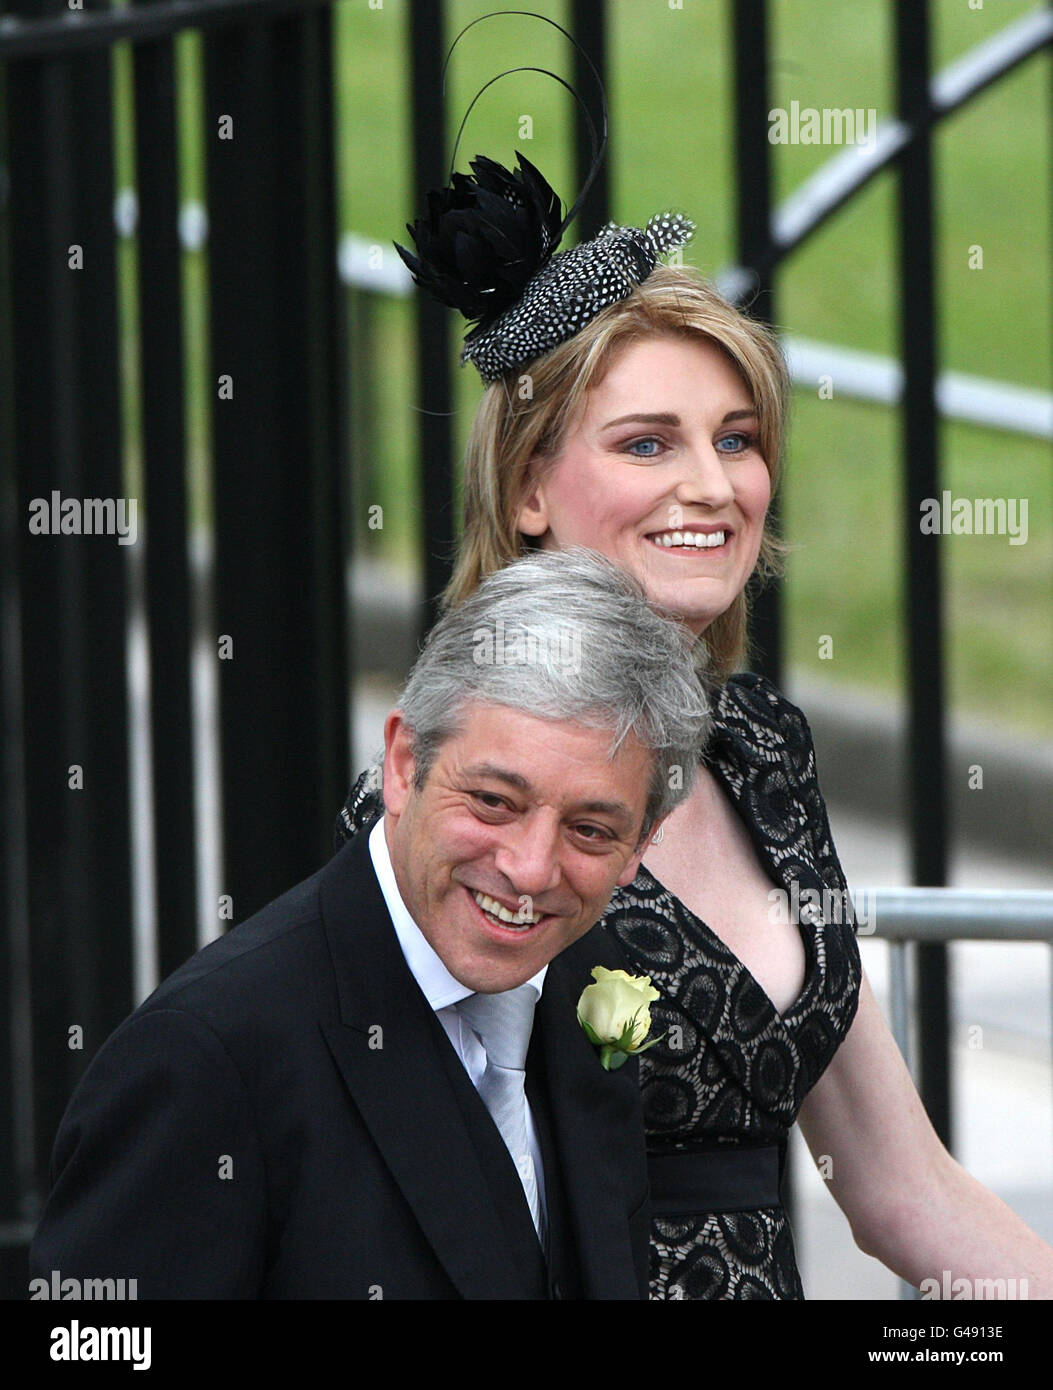 John Bercow, Speaker of the House of Commons and his wife Sally arrive at Westminster Abbey for the wedding of Prince William and Kate Middleton at Westminster Abbey. Photo credit should read: Steve Parsons/PA Wire Stock Photo